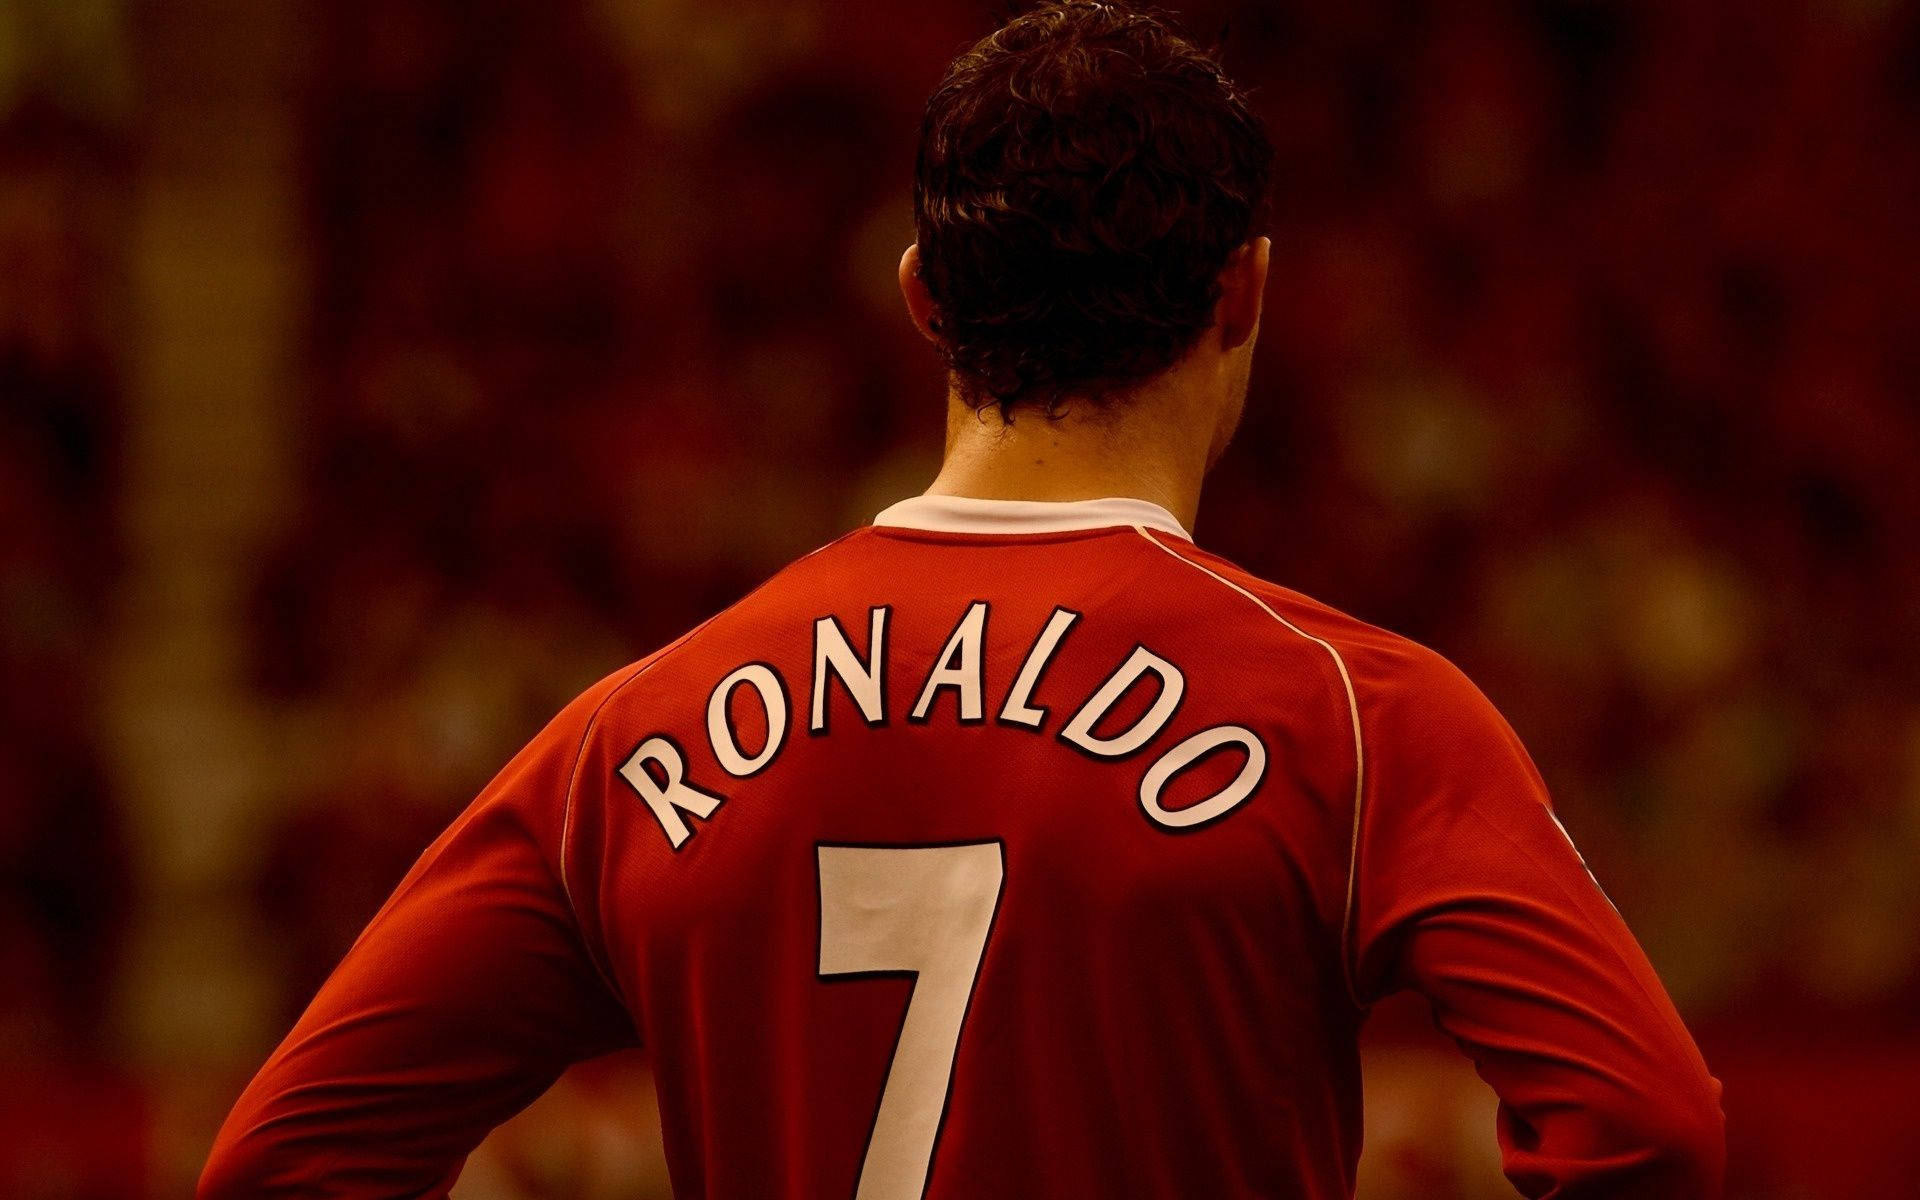 Cristiano Ronaldo Manchester United Jersey Number